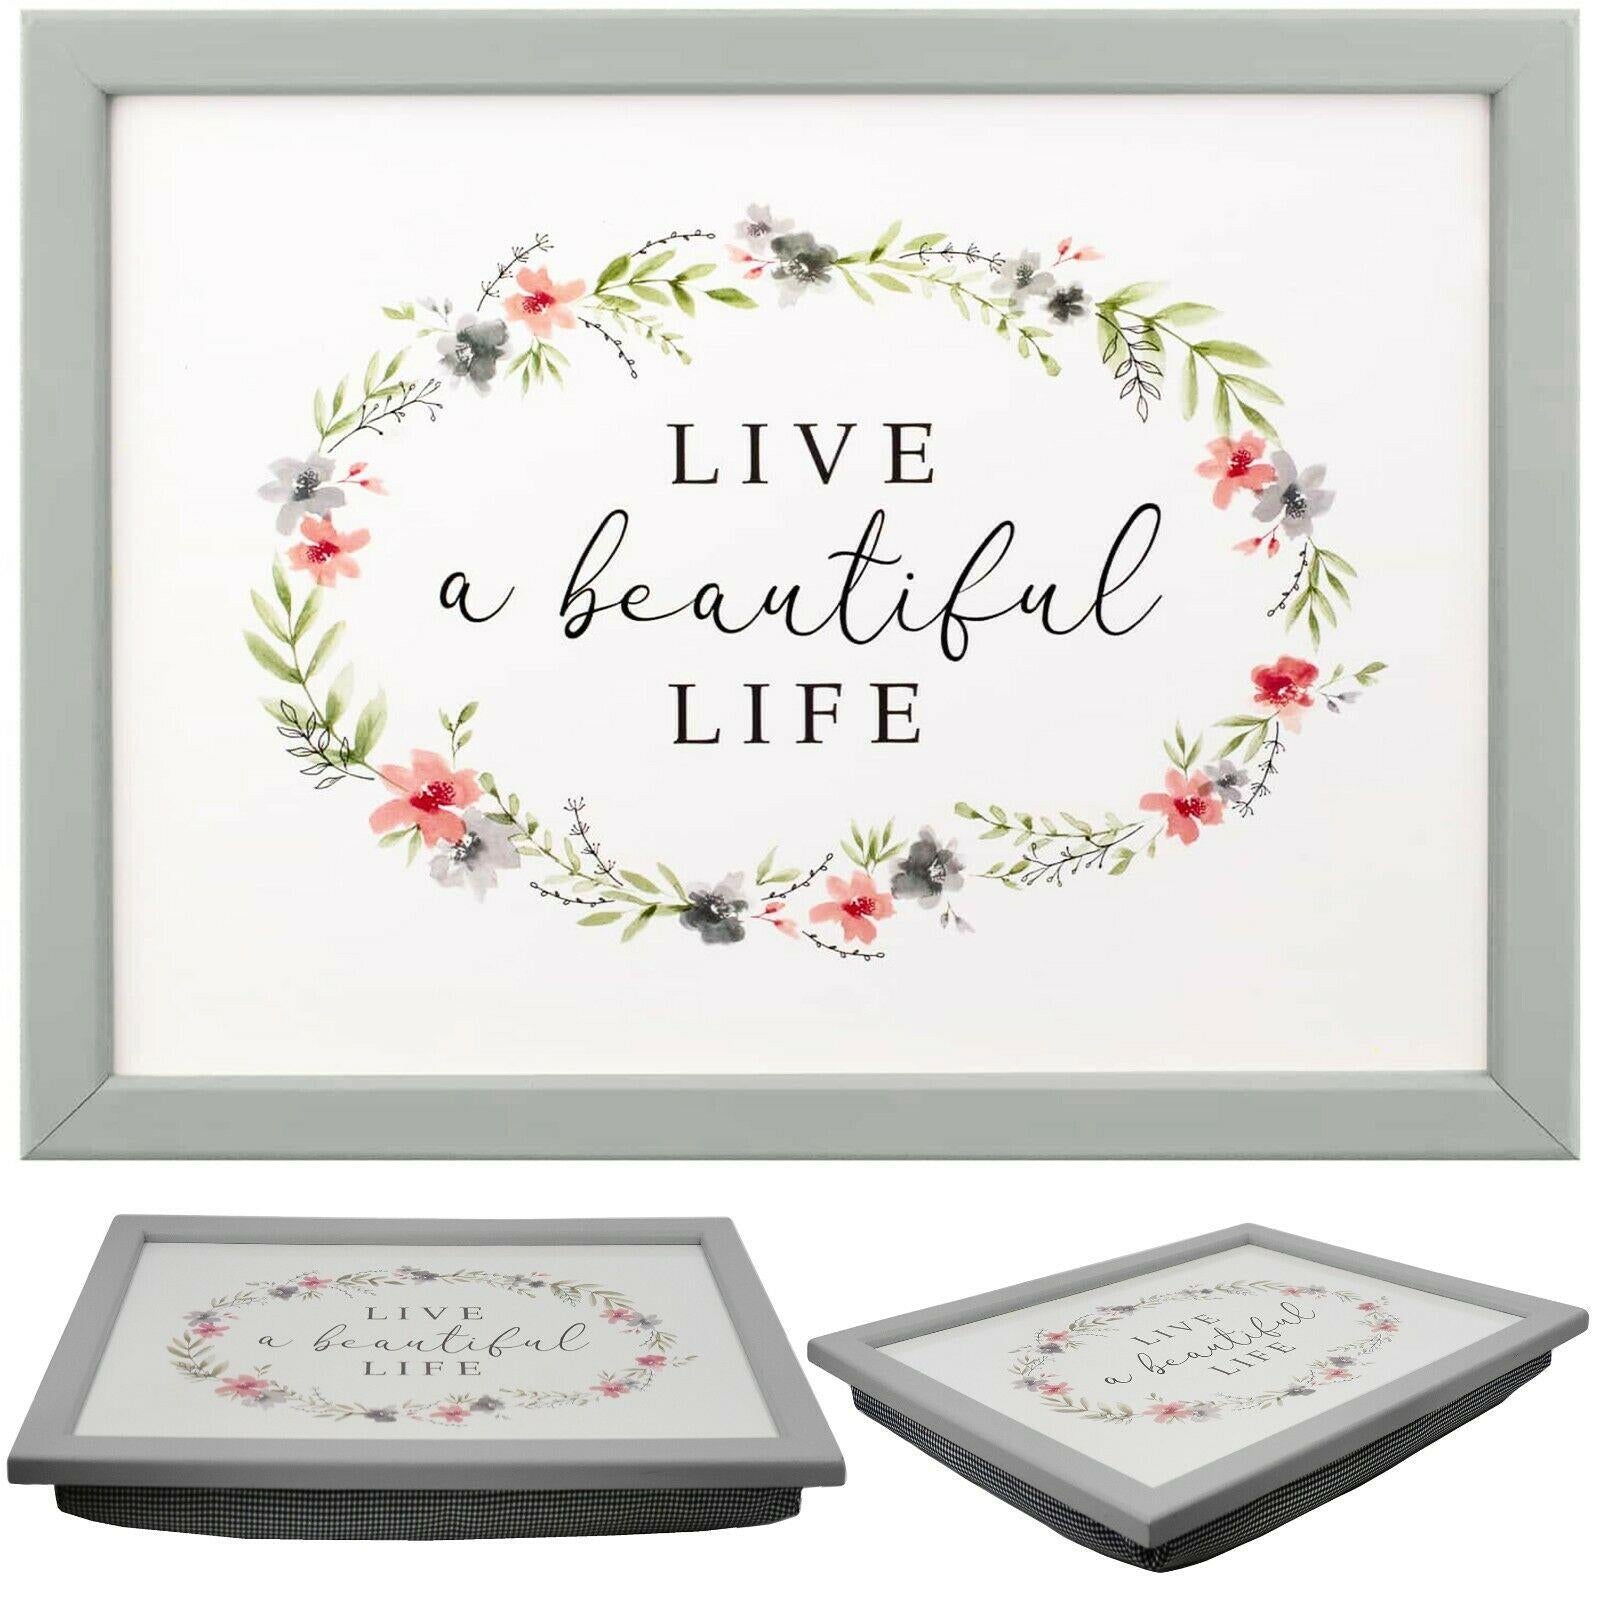 Live a Beautiful Life Lap Tray With Bean Bag Cushion by Geezy - UKBuyZone